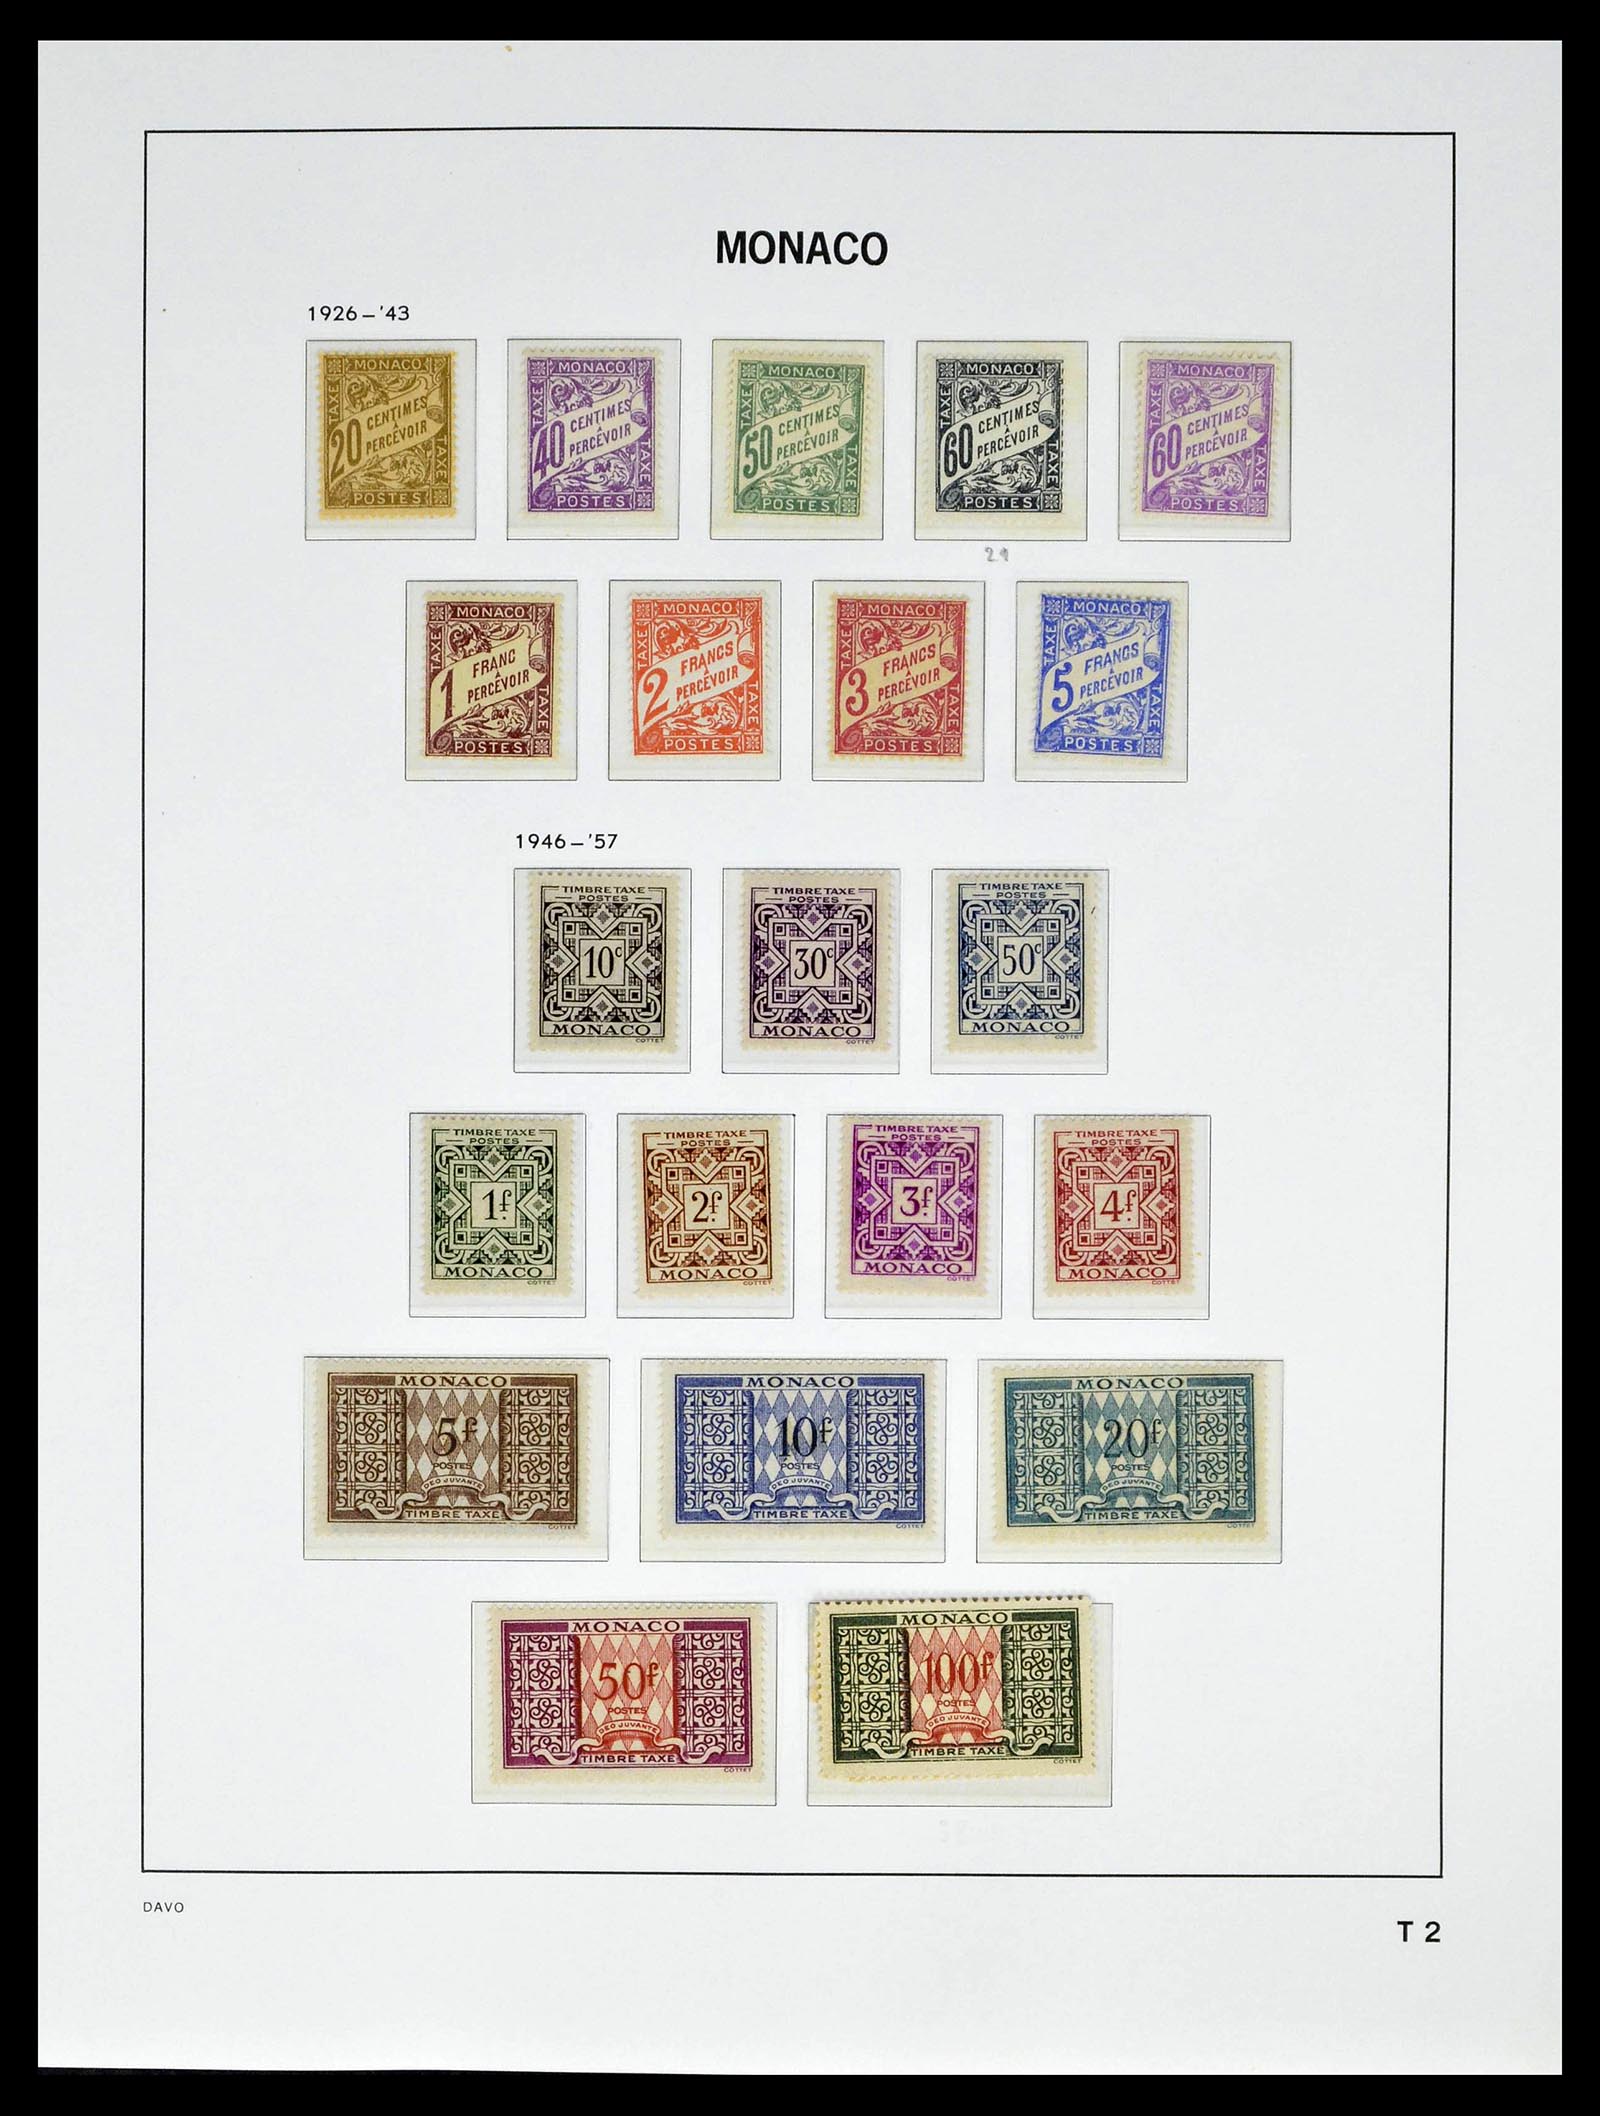 39110 0072 - Stamp collection 39110 Monaco complete 1885-1994.